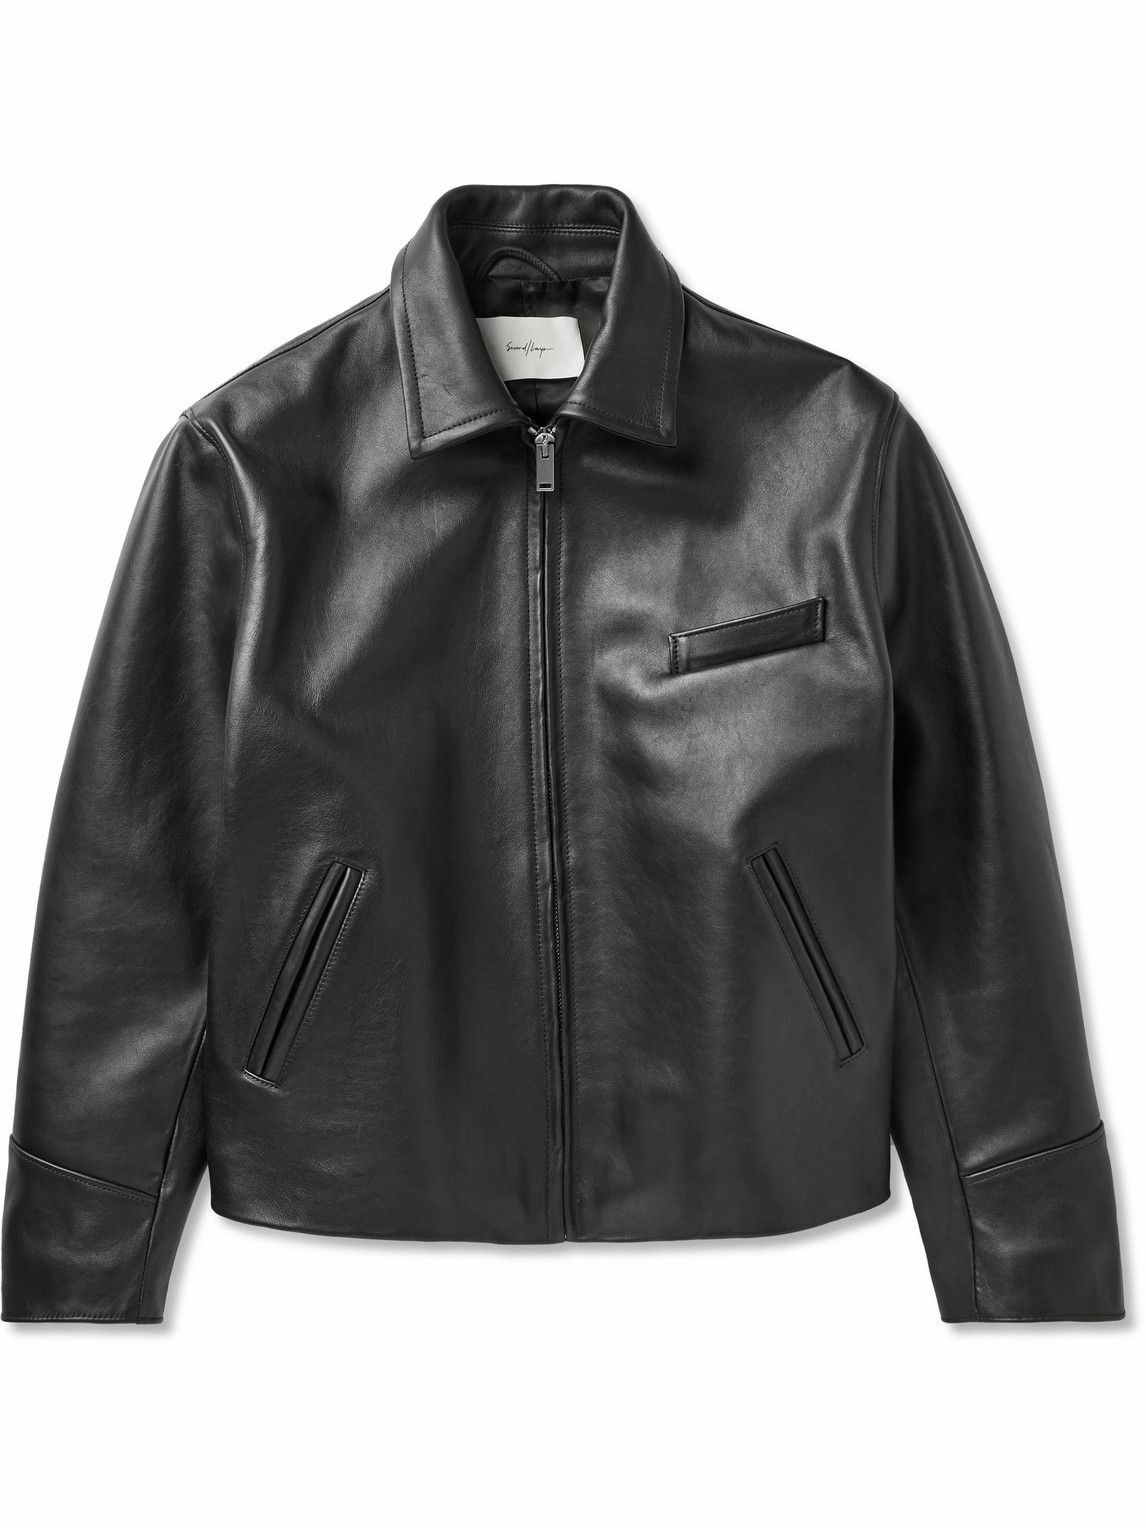 SECOND / LAYER - Leather Jacket - Black Second/Layer